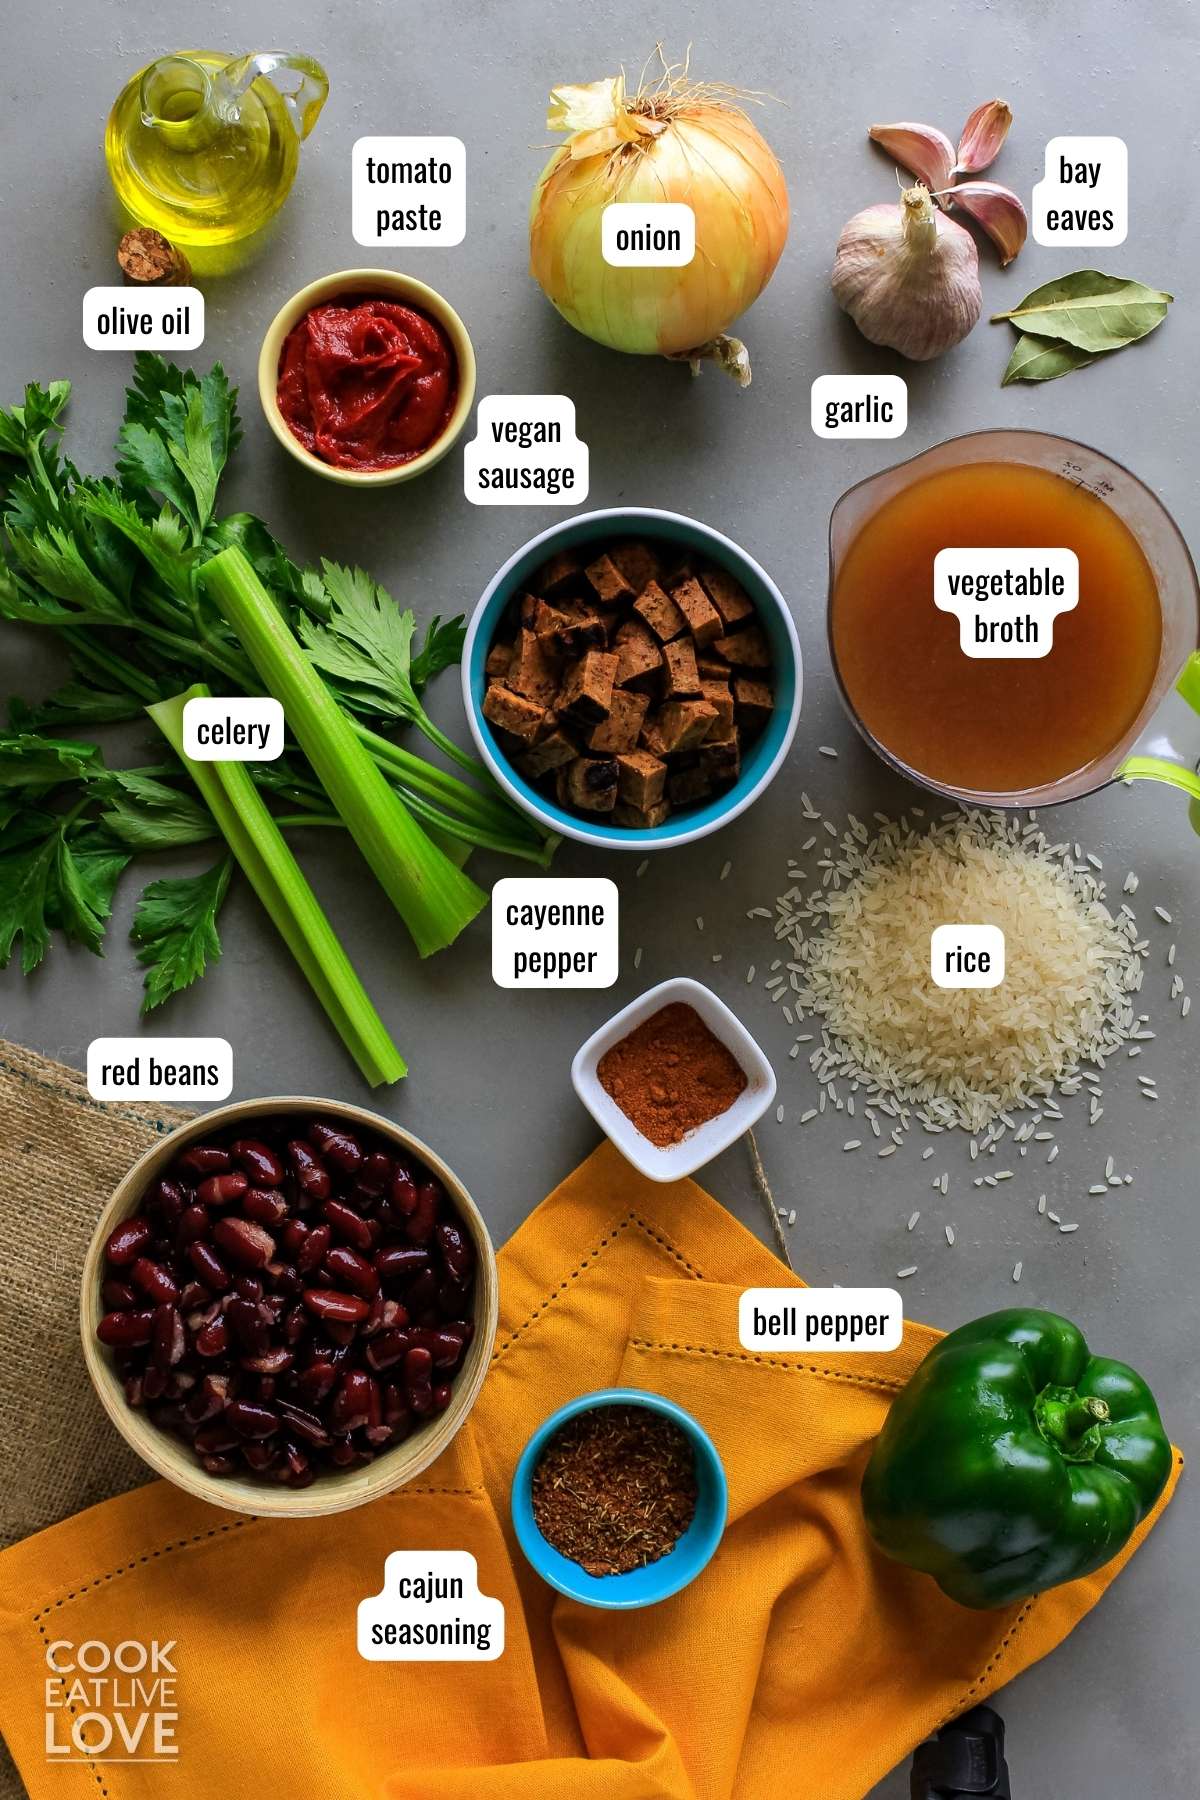 Ingredients to make red beans and rice on table with text labels.